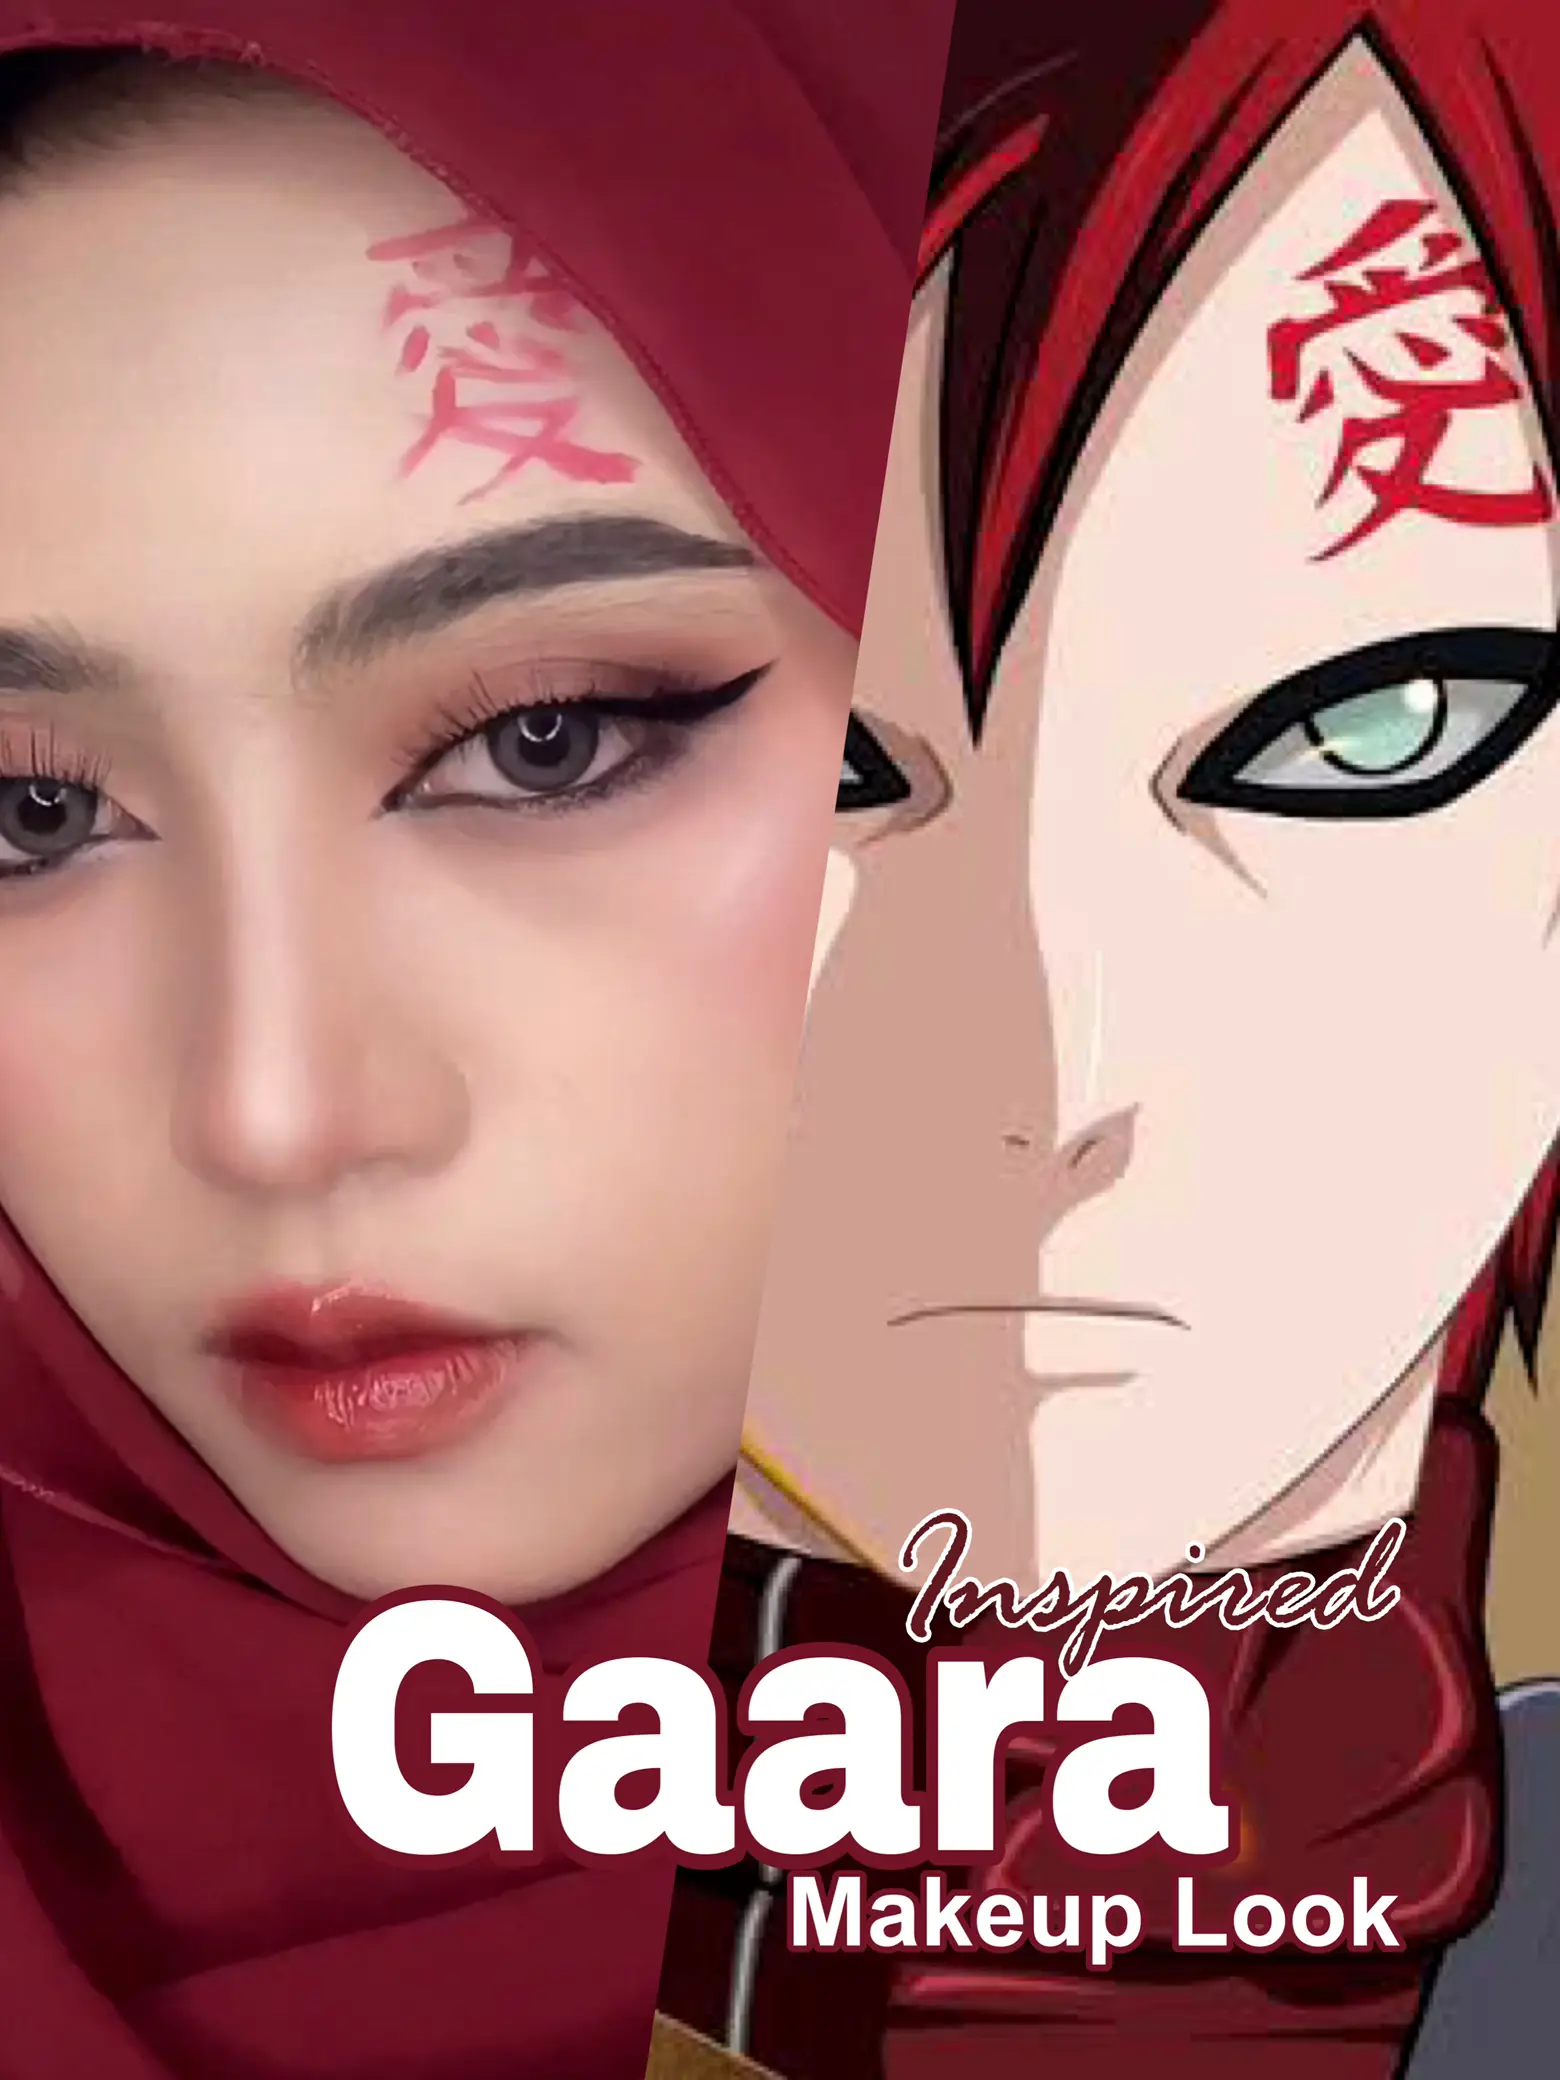 How to Do Anime Cosplay Makeup With the Best Makeup App